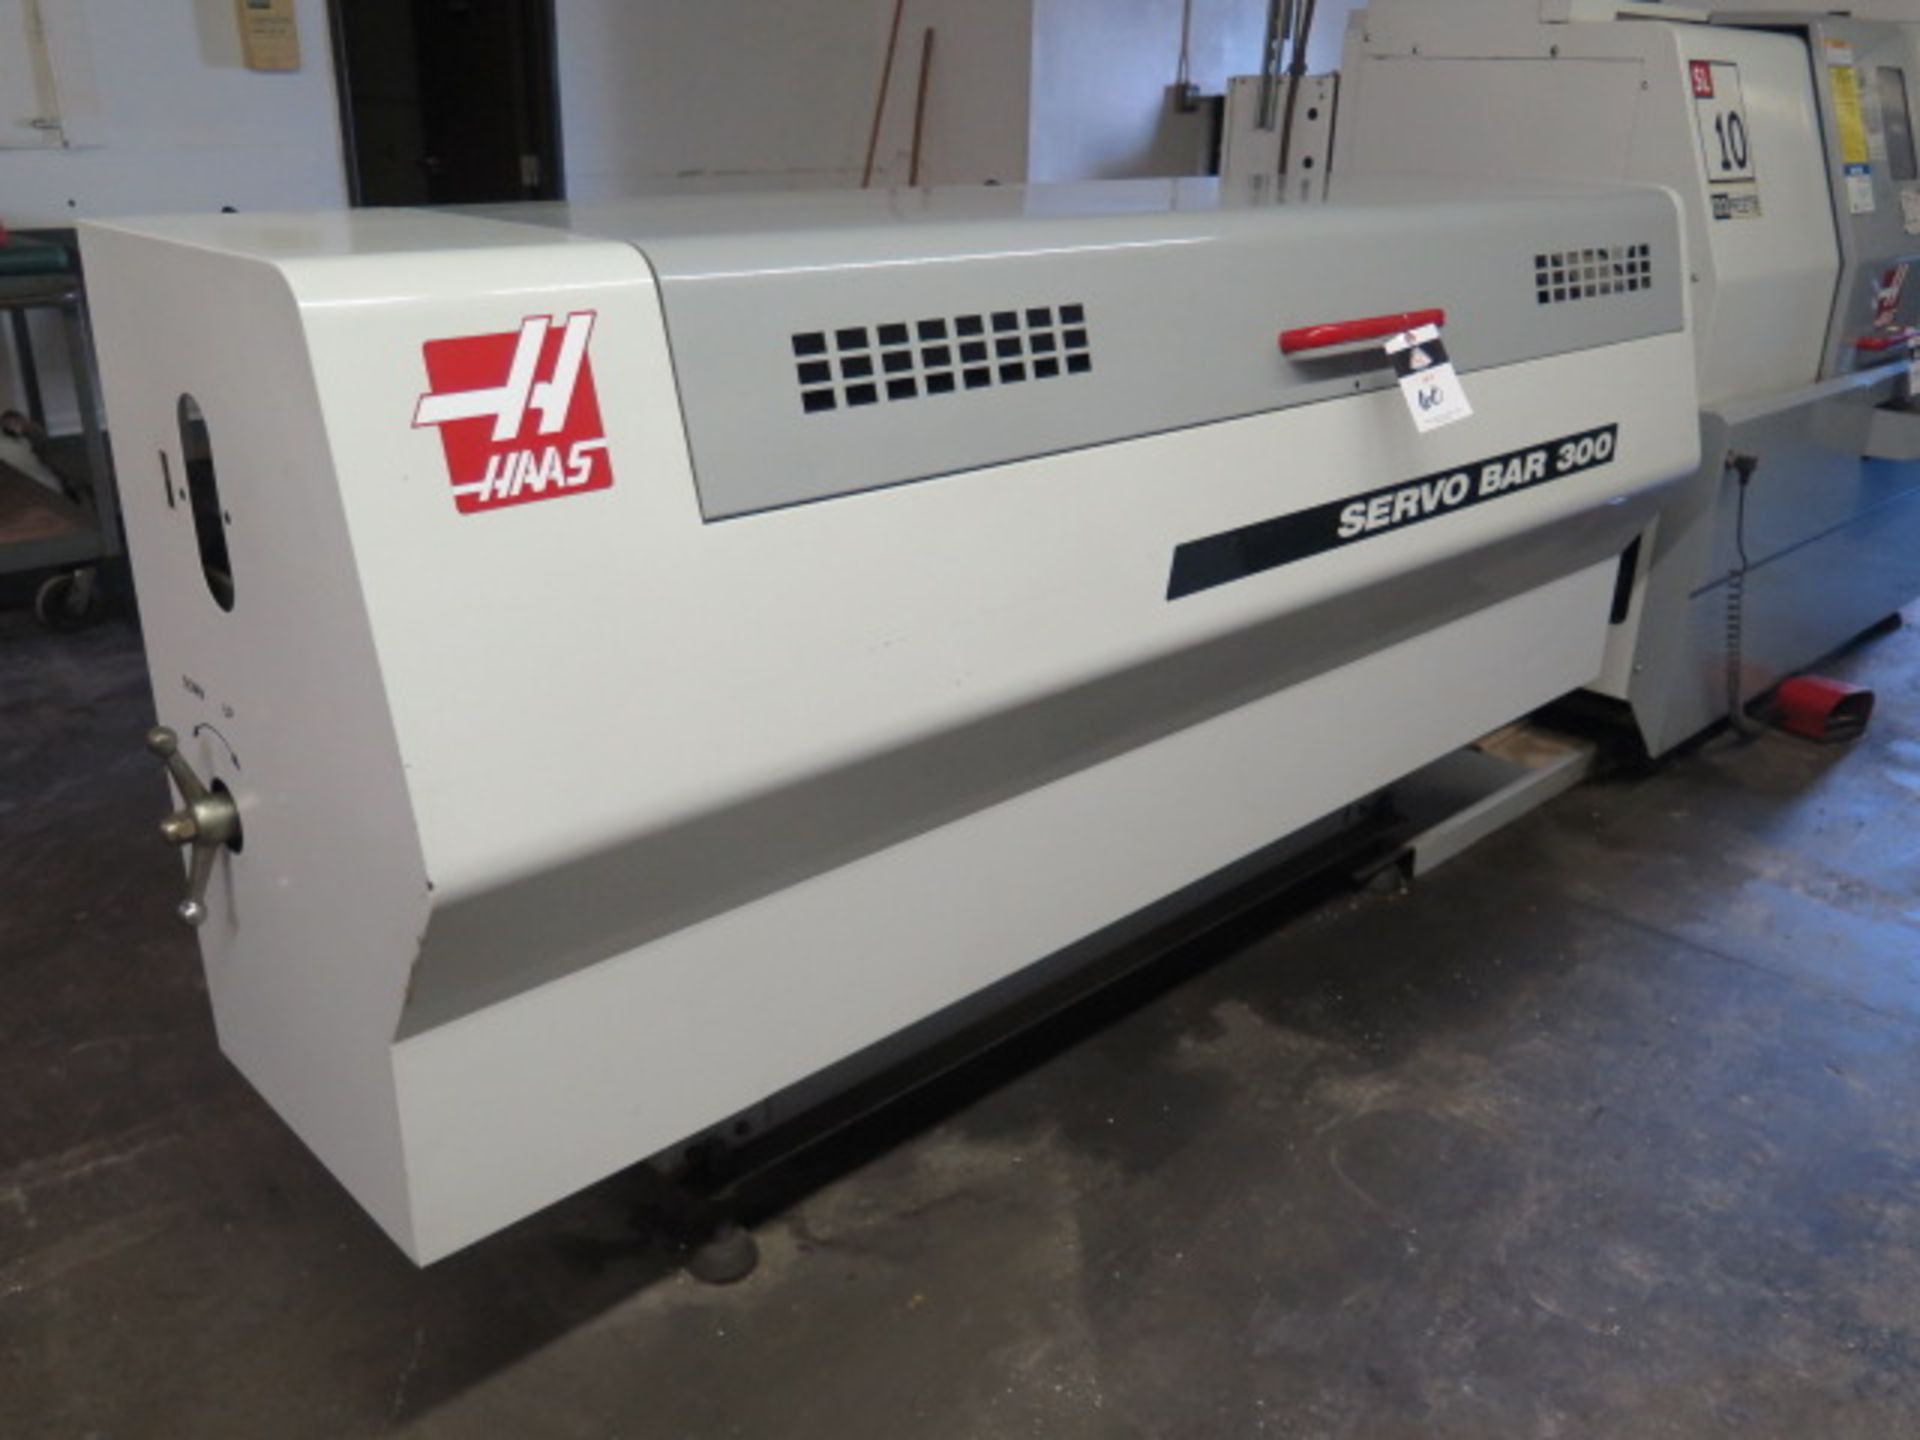 Haas Servobar 300 Automatic Bar Loader / Feeder s/n 91279 (SOLD AS-IS - NO WARRANTY) - Image 3 of 9